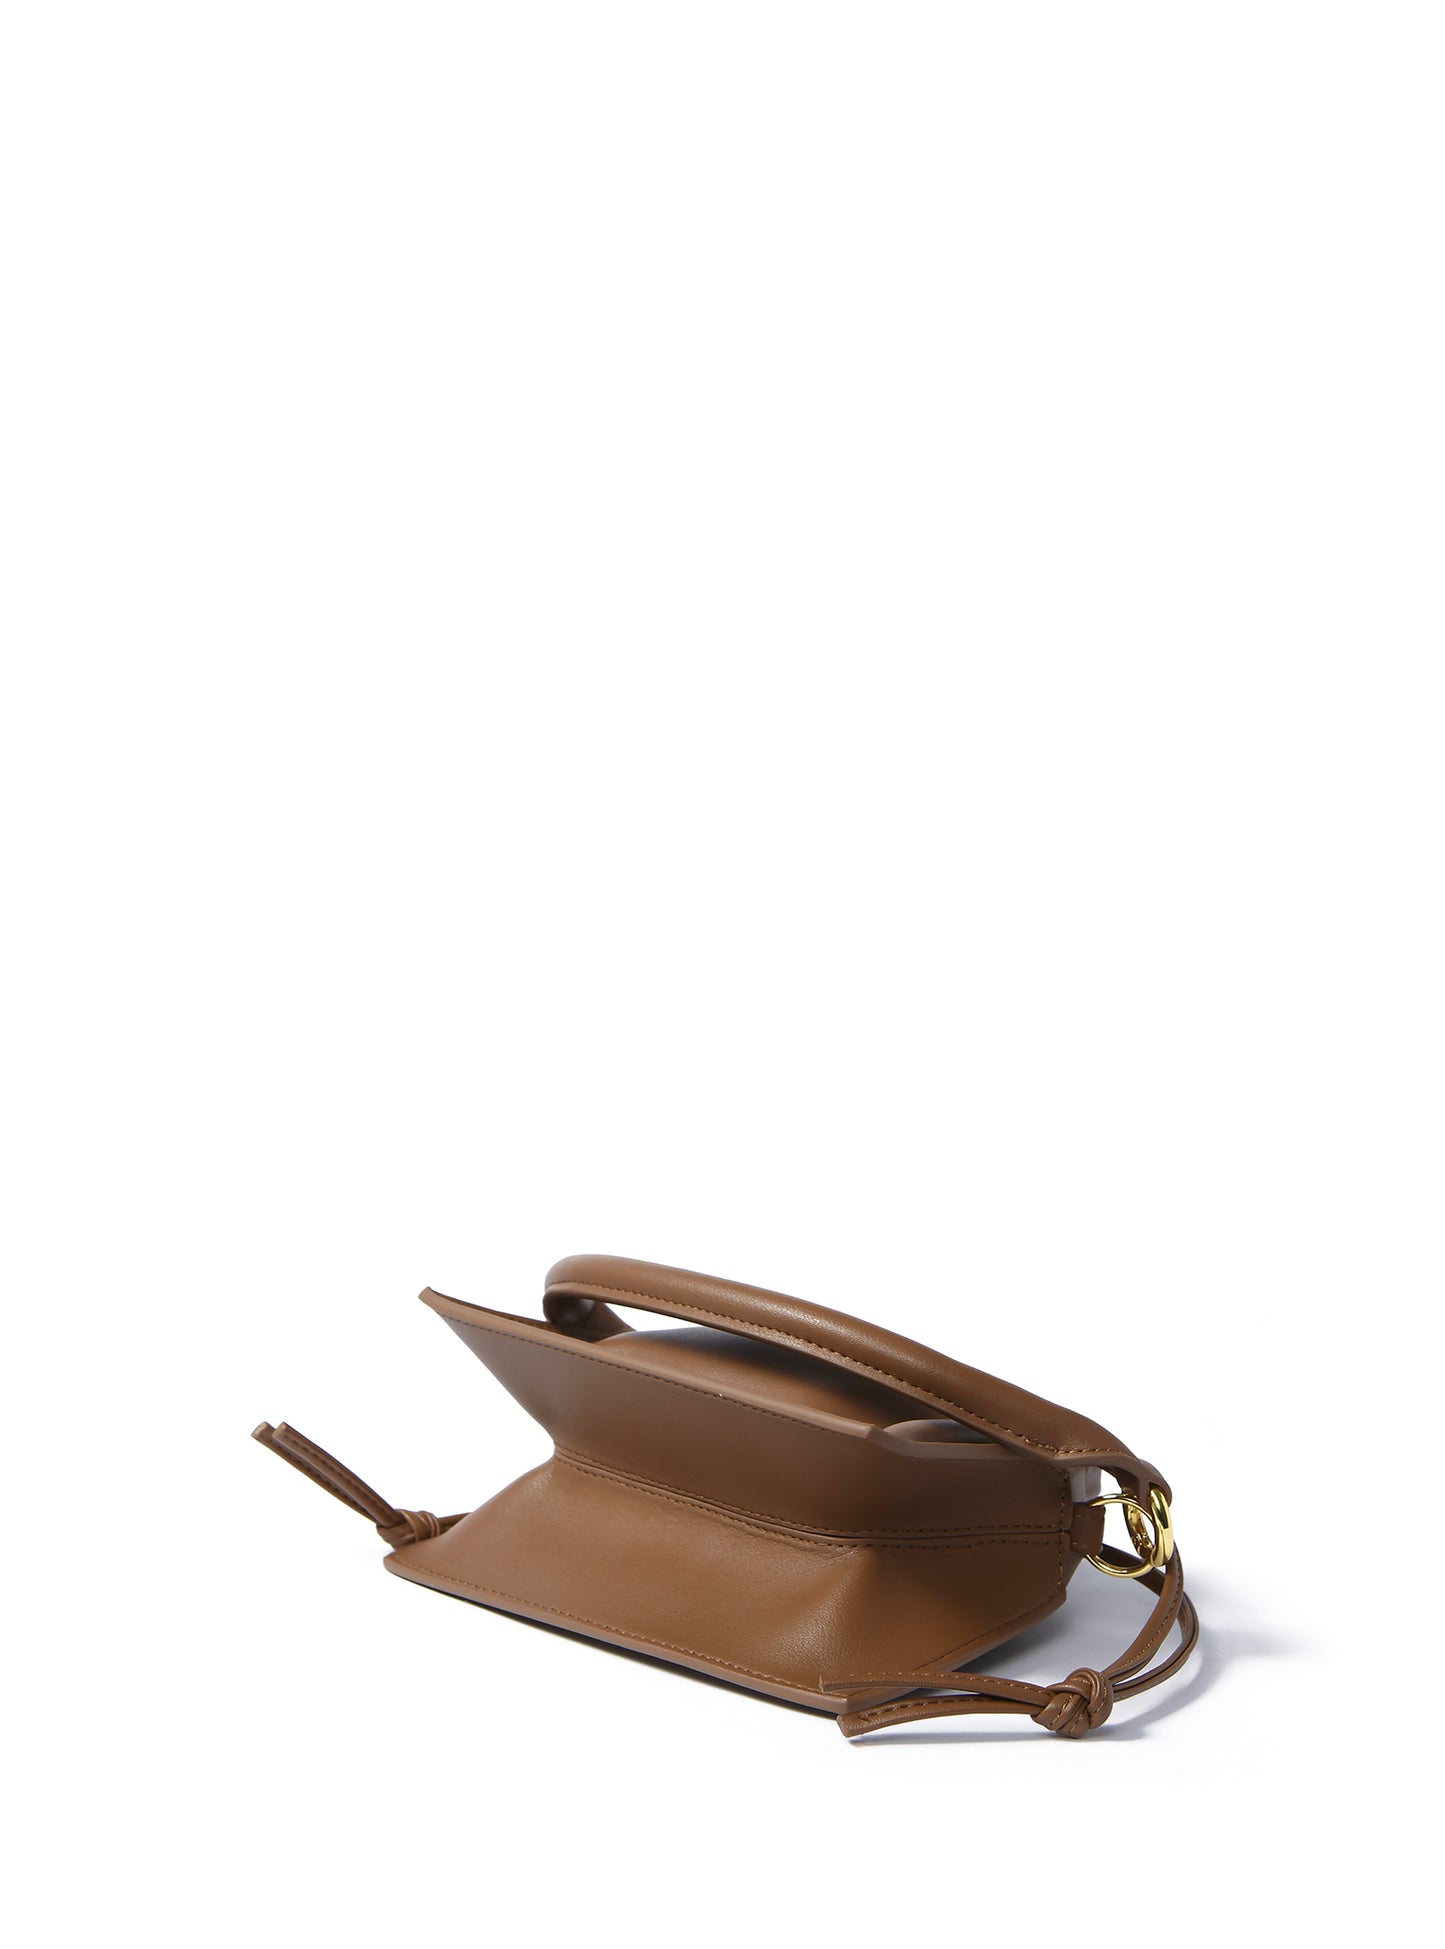 Riley Bag in Smooth Leather, Caramel